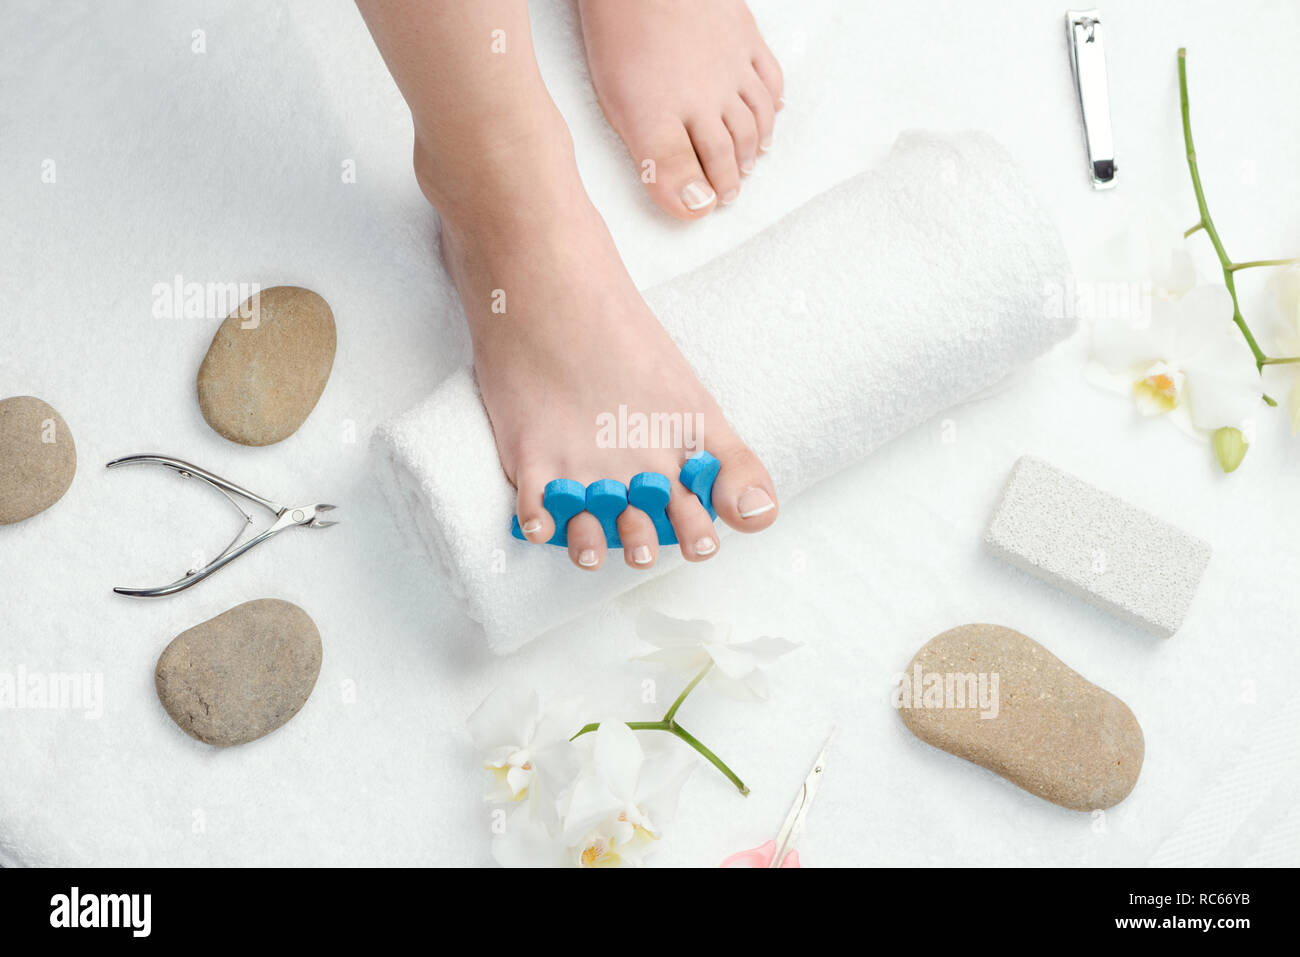 Woman's foot with toe separator Stock Photo